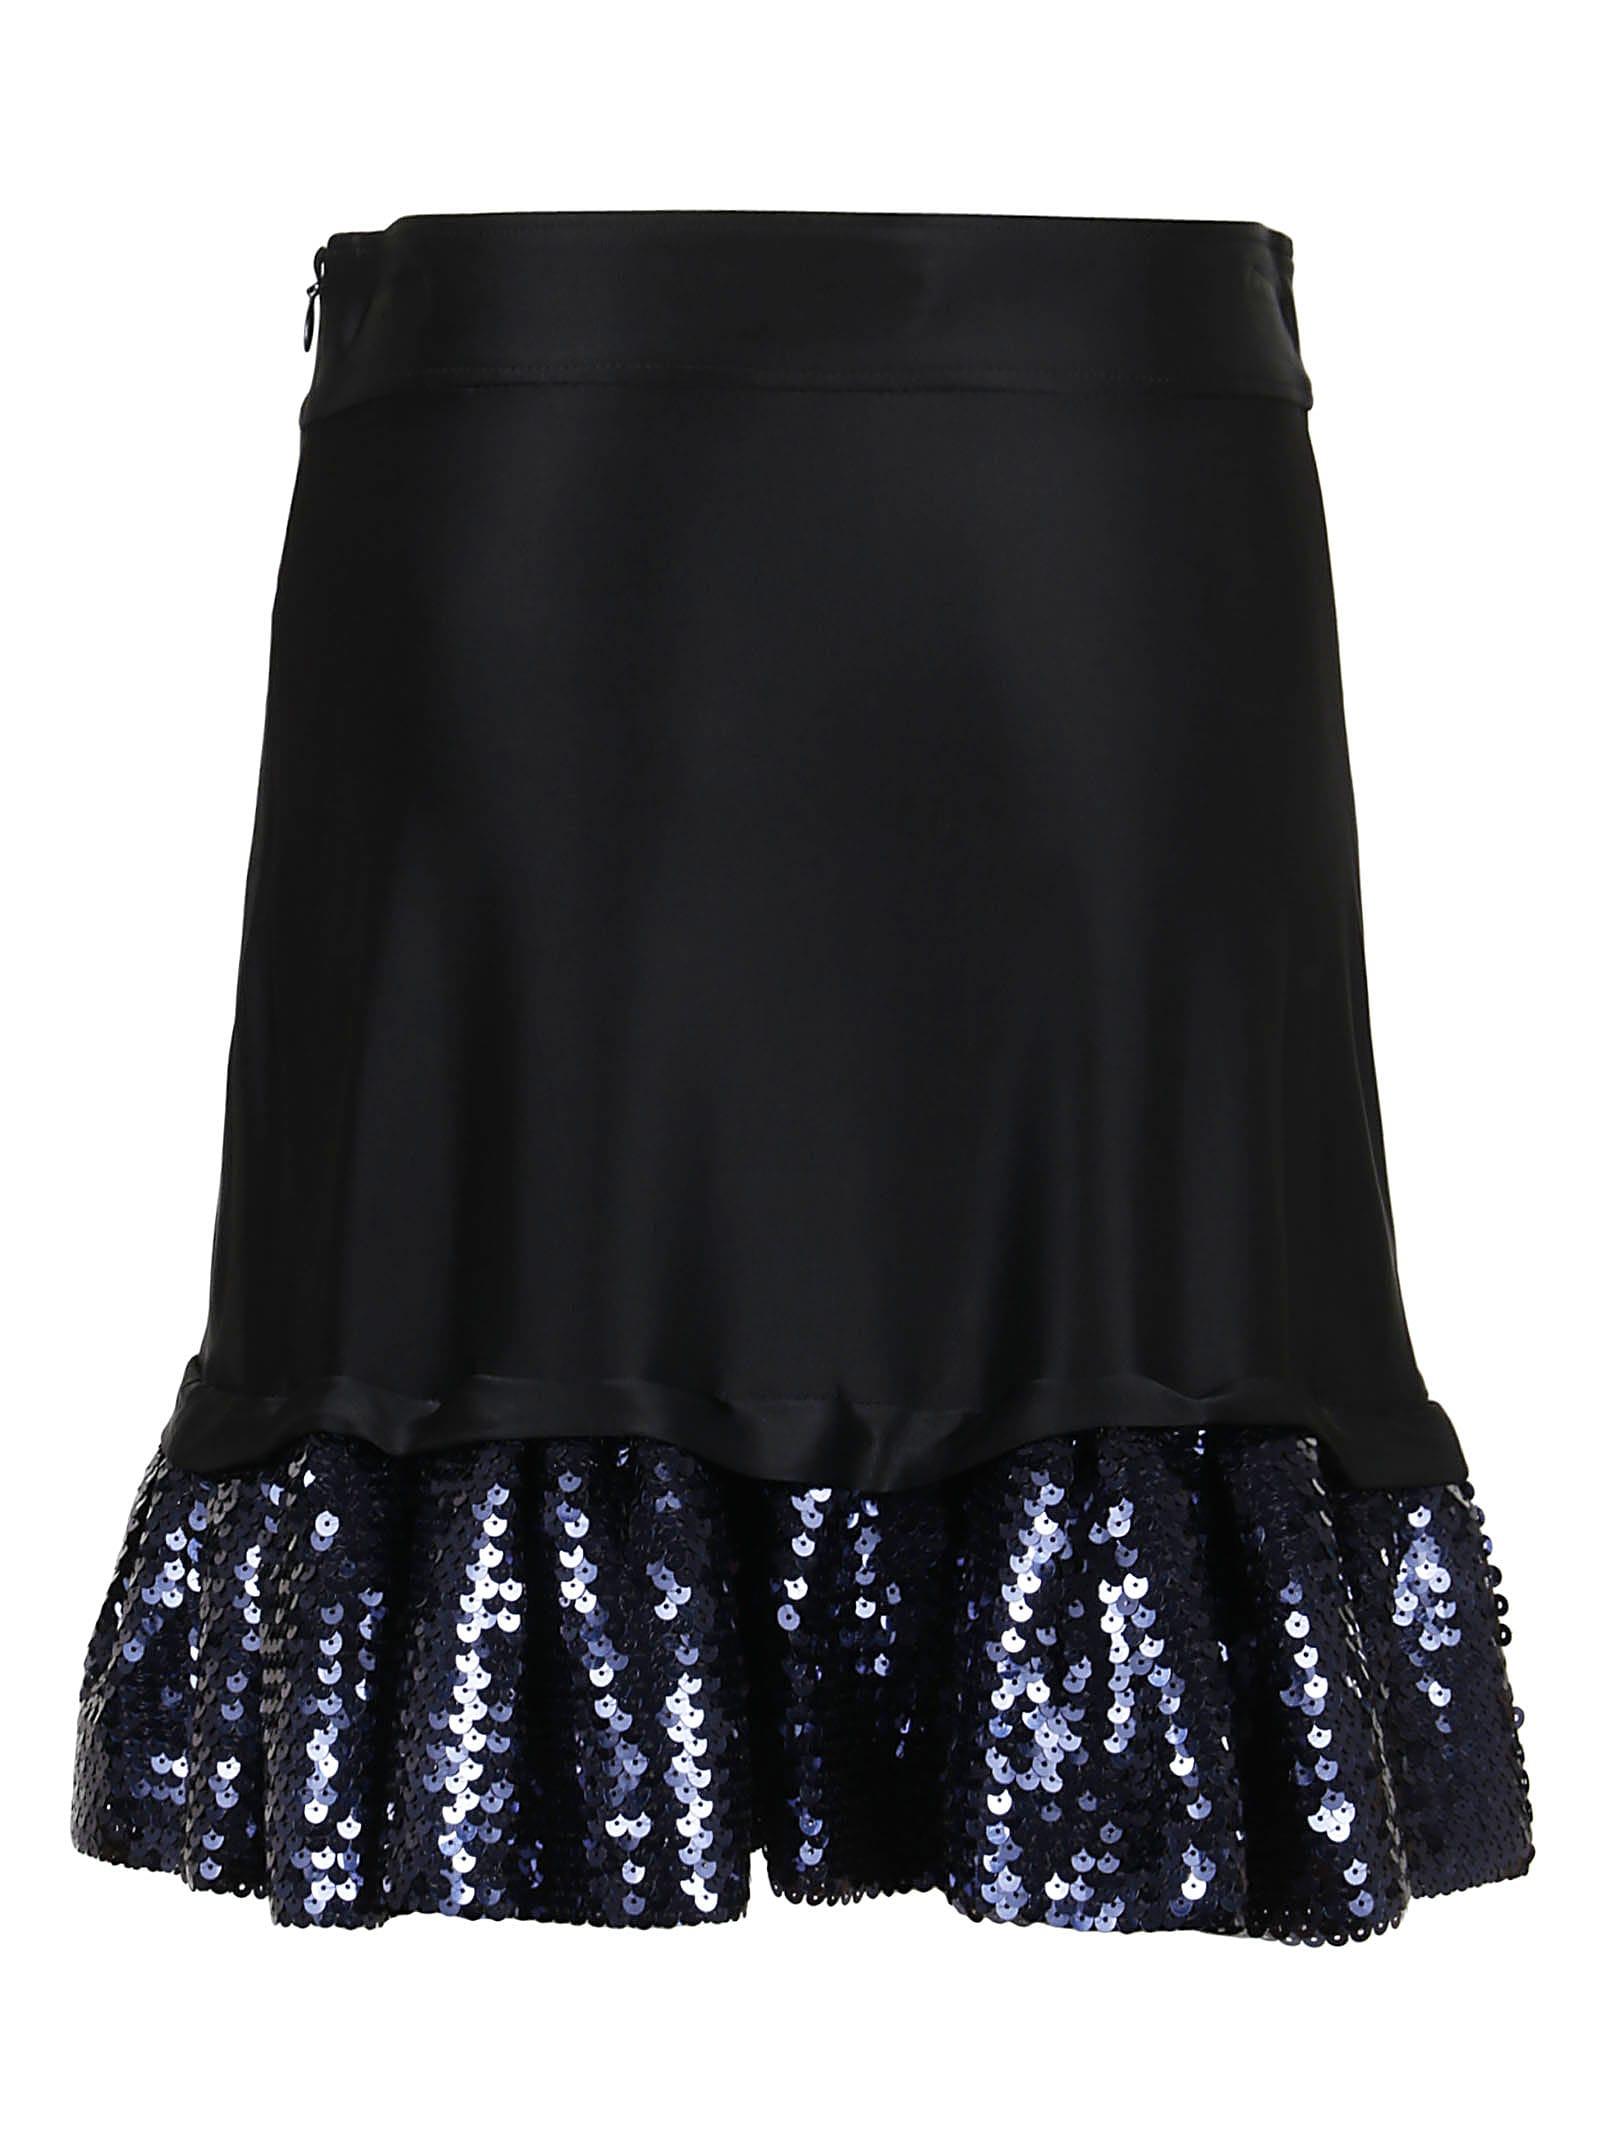 Paco Rabanne Synthetic Skirt in Black Save 36% Womens Clothing Skirts Mini skirts 